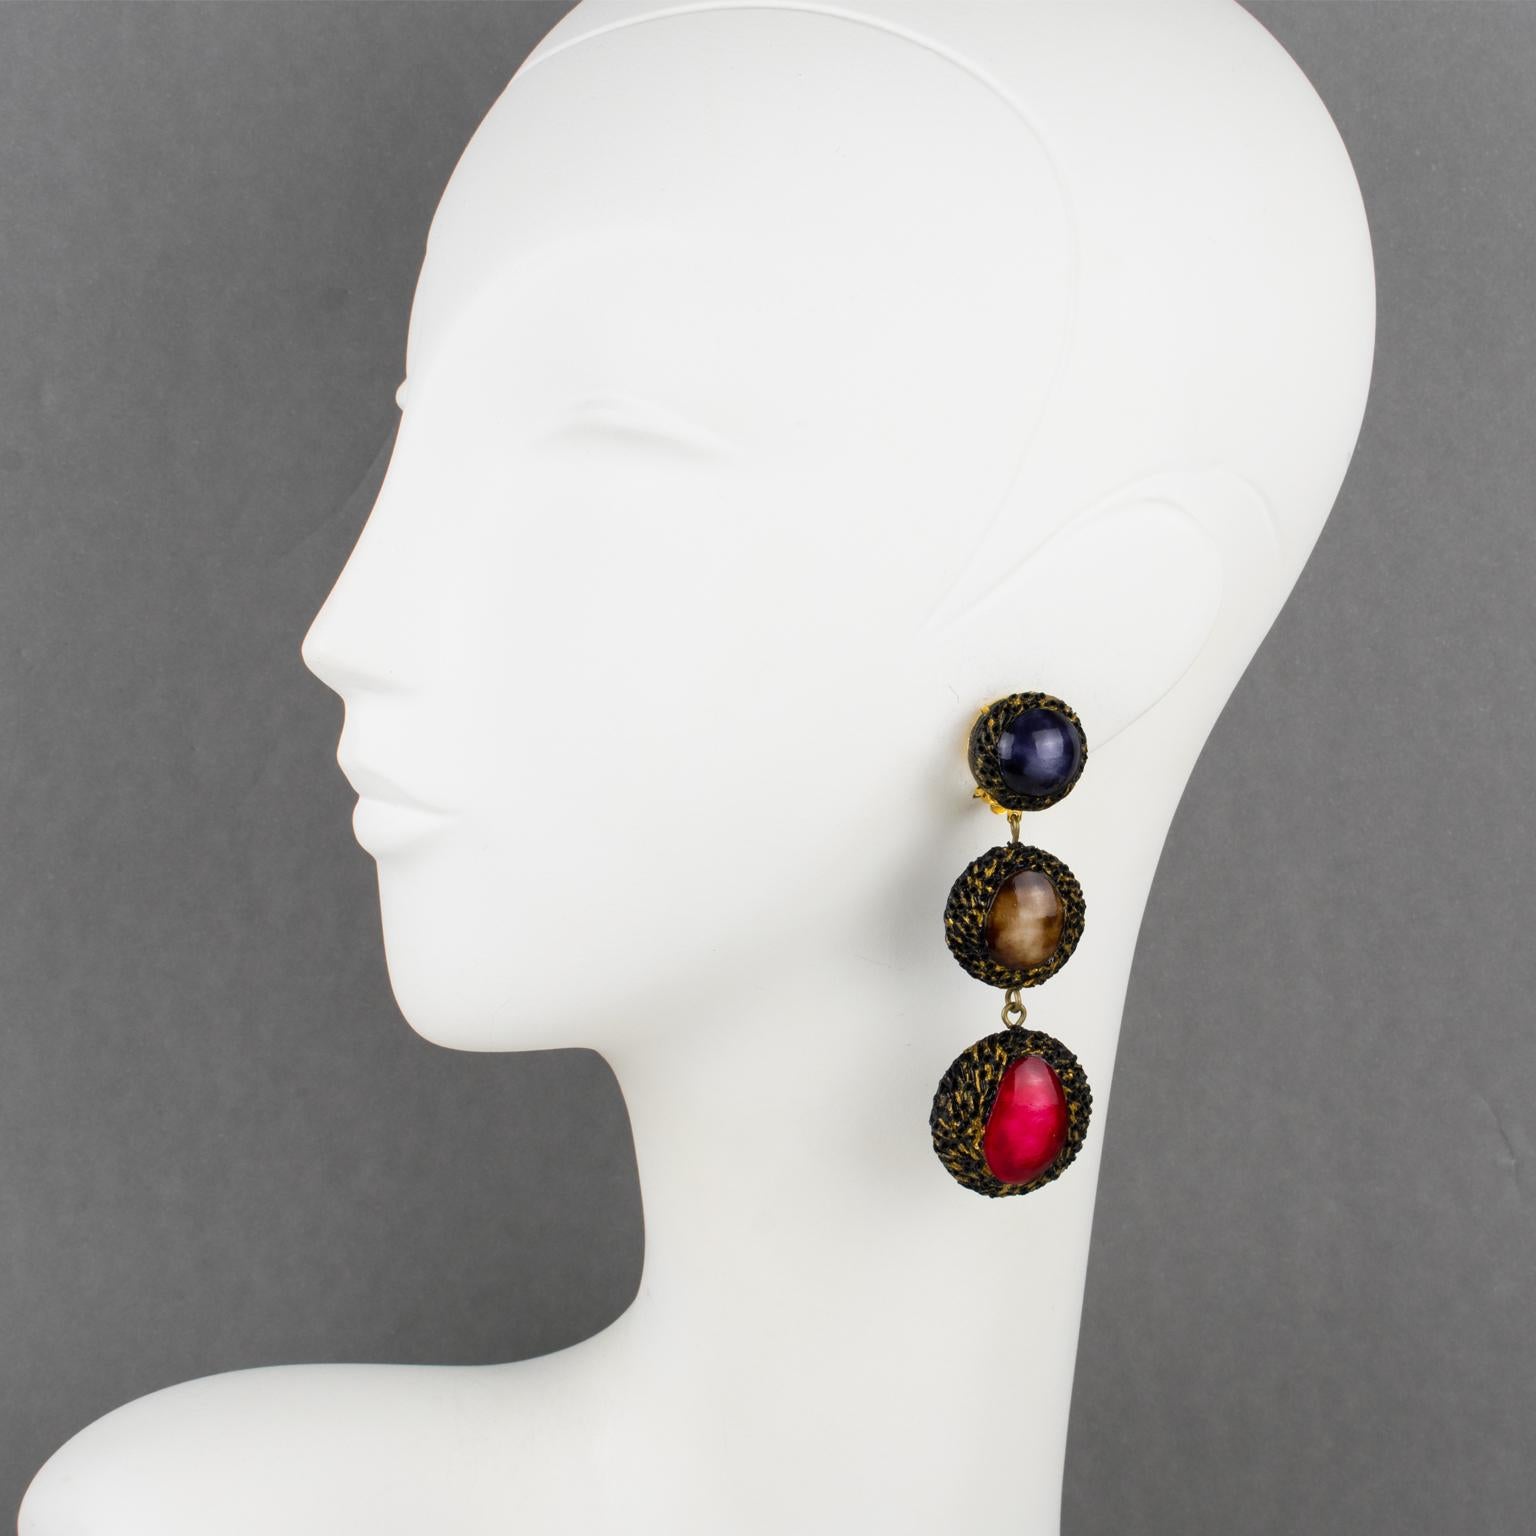 Lovely dimensional dangling clip-on earrings designed by Cilea Paris. The long graduated shape is composed of geometric resin elements topped with braided textured patterns and three colored cabochons. These different elements build together to form